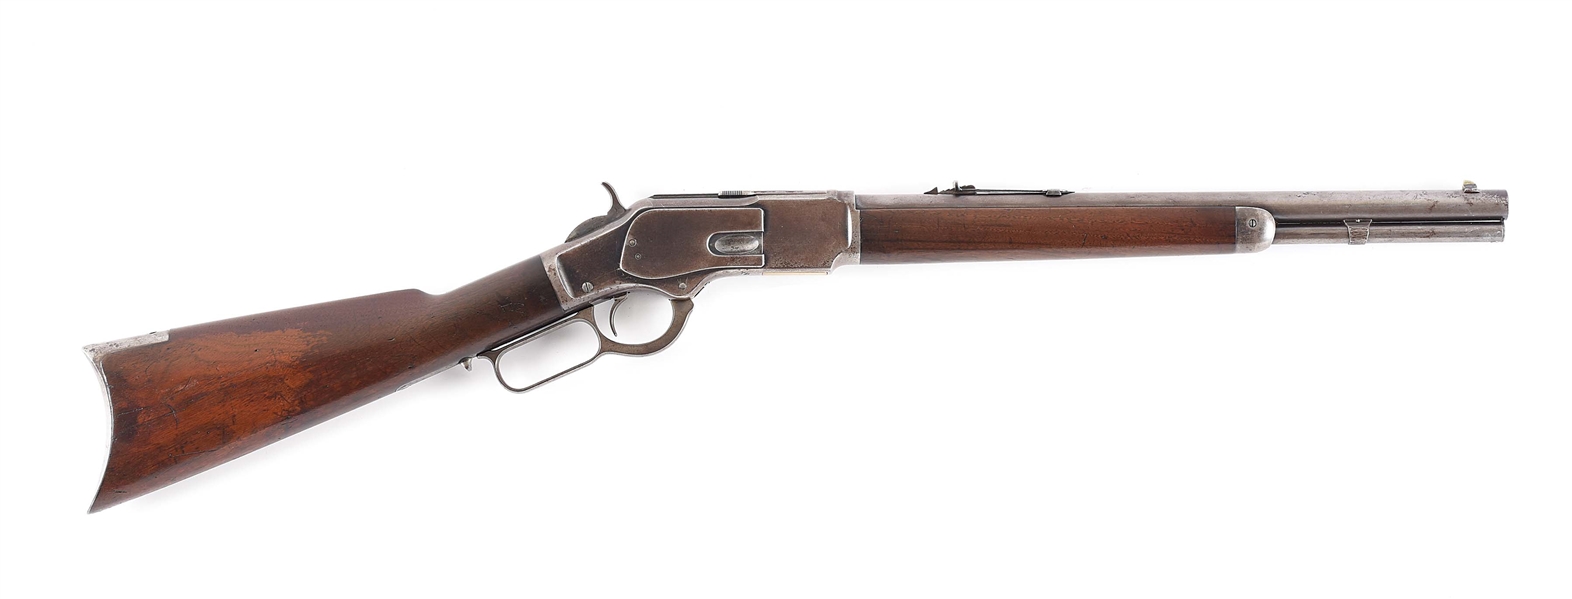 (A) PROFESSIONALLY SHORTENED WINCHESTER 1873 LEVER ACTION RIFLE 17" (1889).